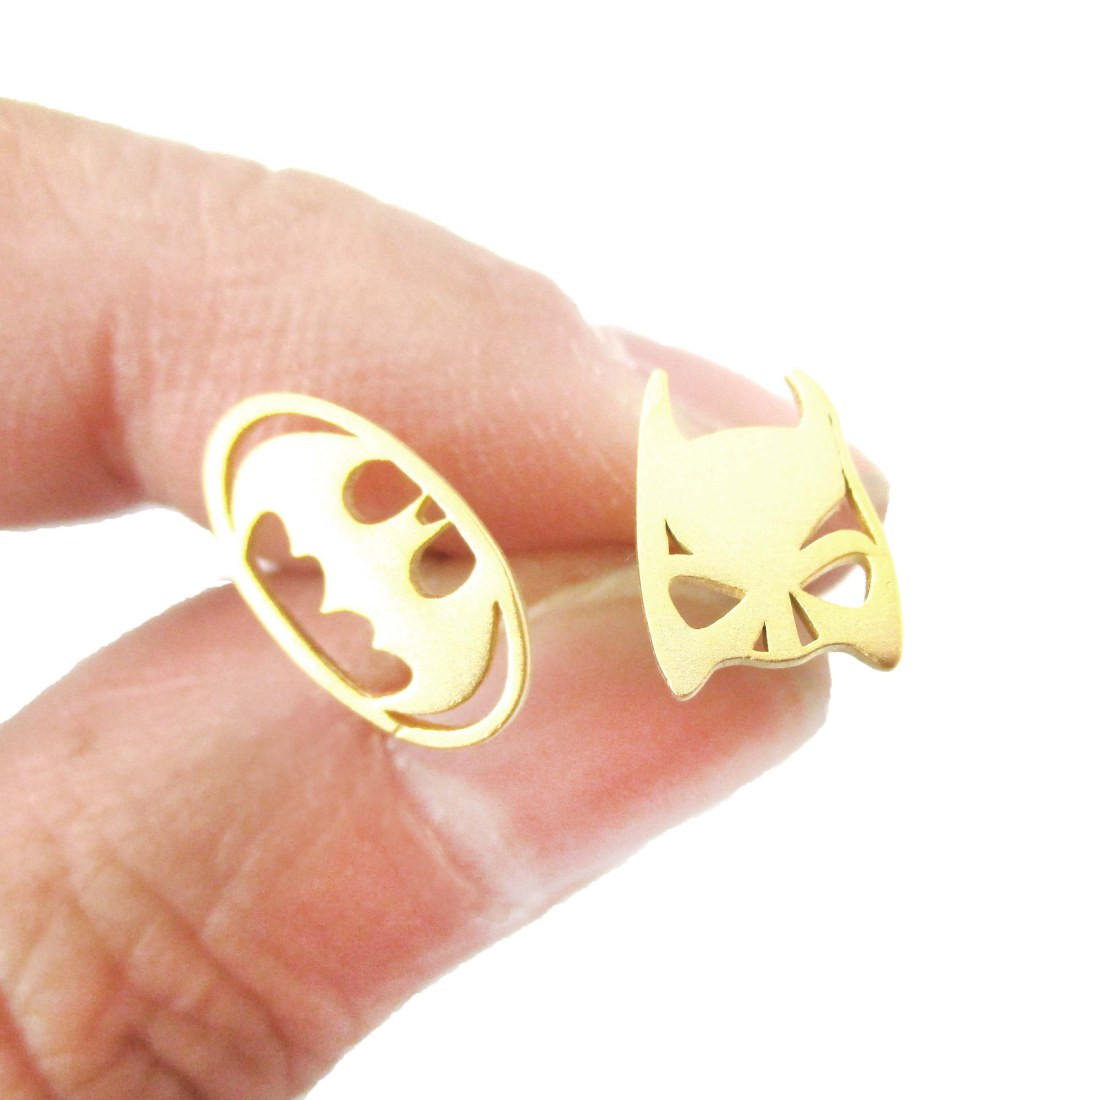 Allergy Free Earrings
 Batman Mask and Logo Shaped Silhouette Allergy Free Stud